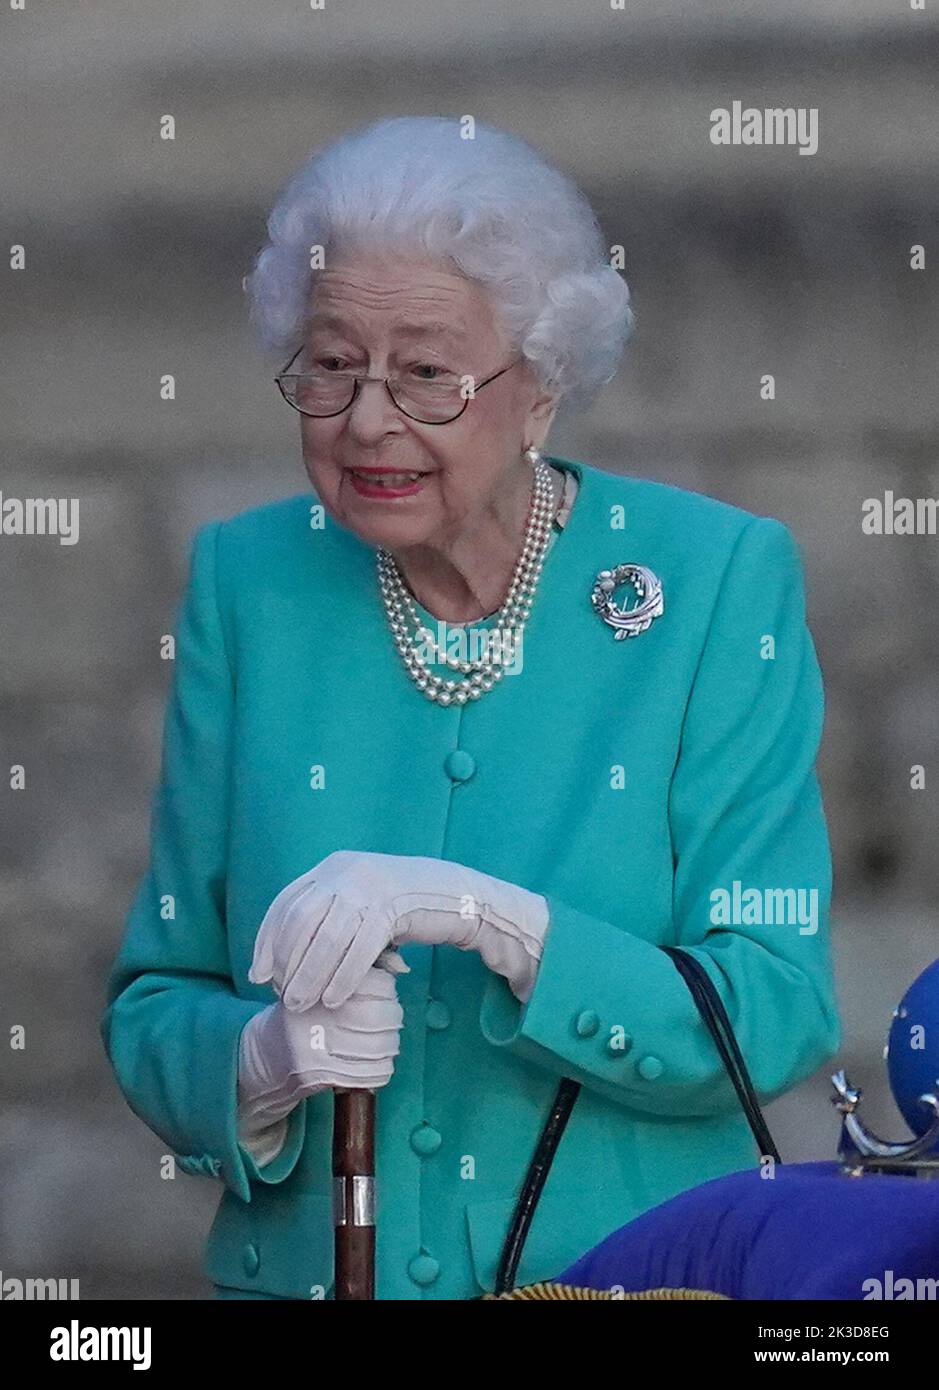 File photo dated 2/6/2022 of Queen Elizabeth II symbolically leads the lighting of the principal Jubilee beacon at Windsor Castle, as part of a chain of more than 3,500 flaming tributes to her 70-year-reign, during the Platinum Jubilee celebrations. The brooch she wore that day, believed to be the last jewel gifted to her, will go on display at the Goldsmiths' Fair in London. The Goldsmiths' company commissioned the brooch gifted to the Queen to commemorate her Platinum Jubilee. Issue date: Monday September 26, 2022. Stock Photo